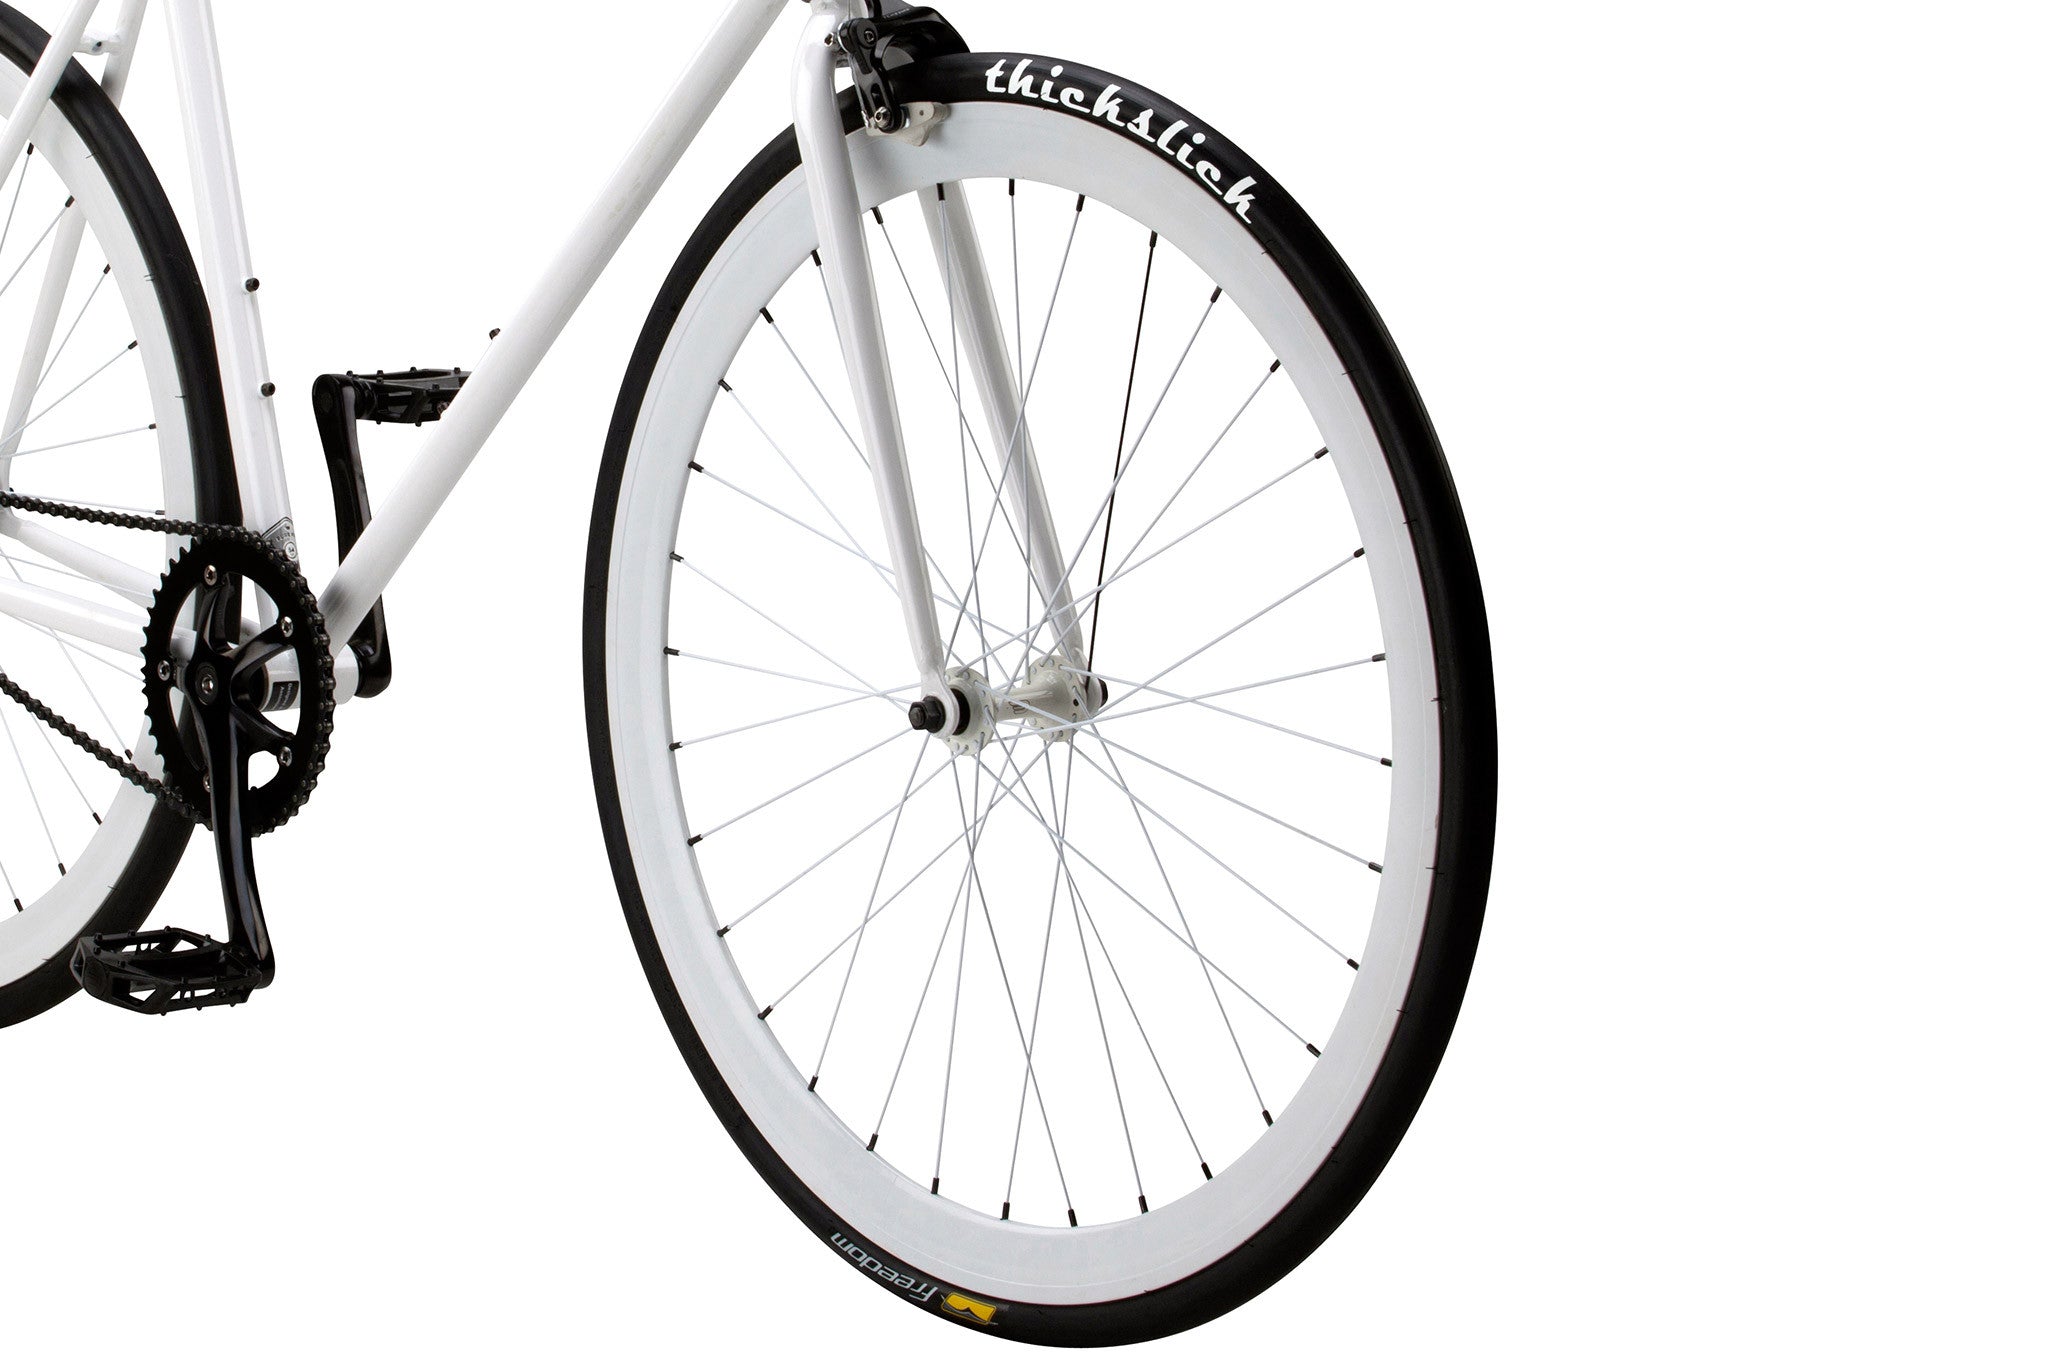 Thickslick 700C Freedom Sport Tire